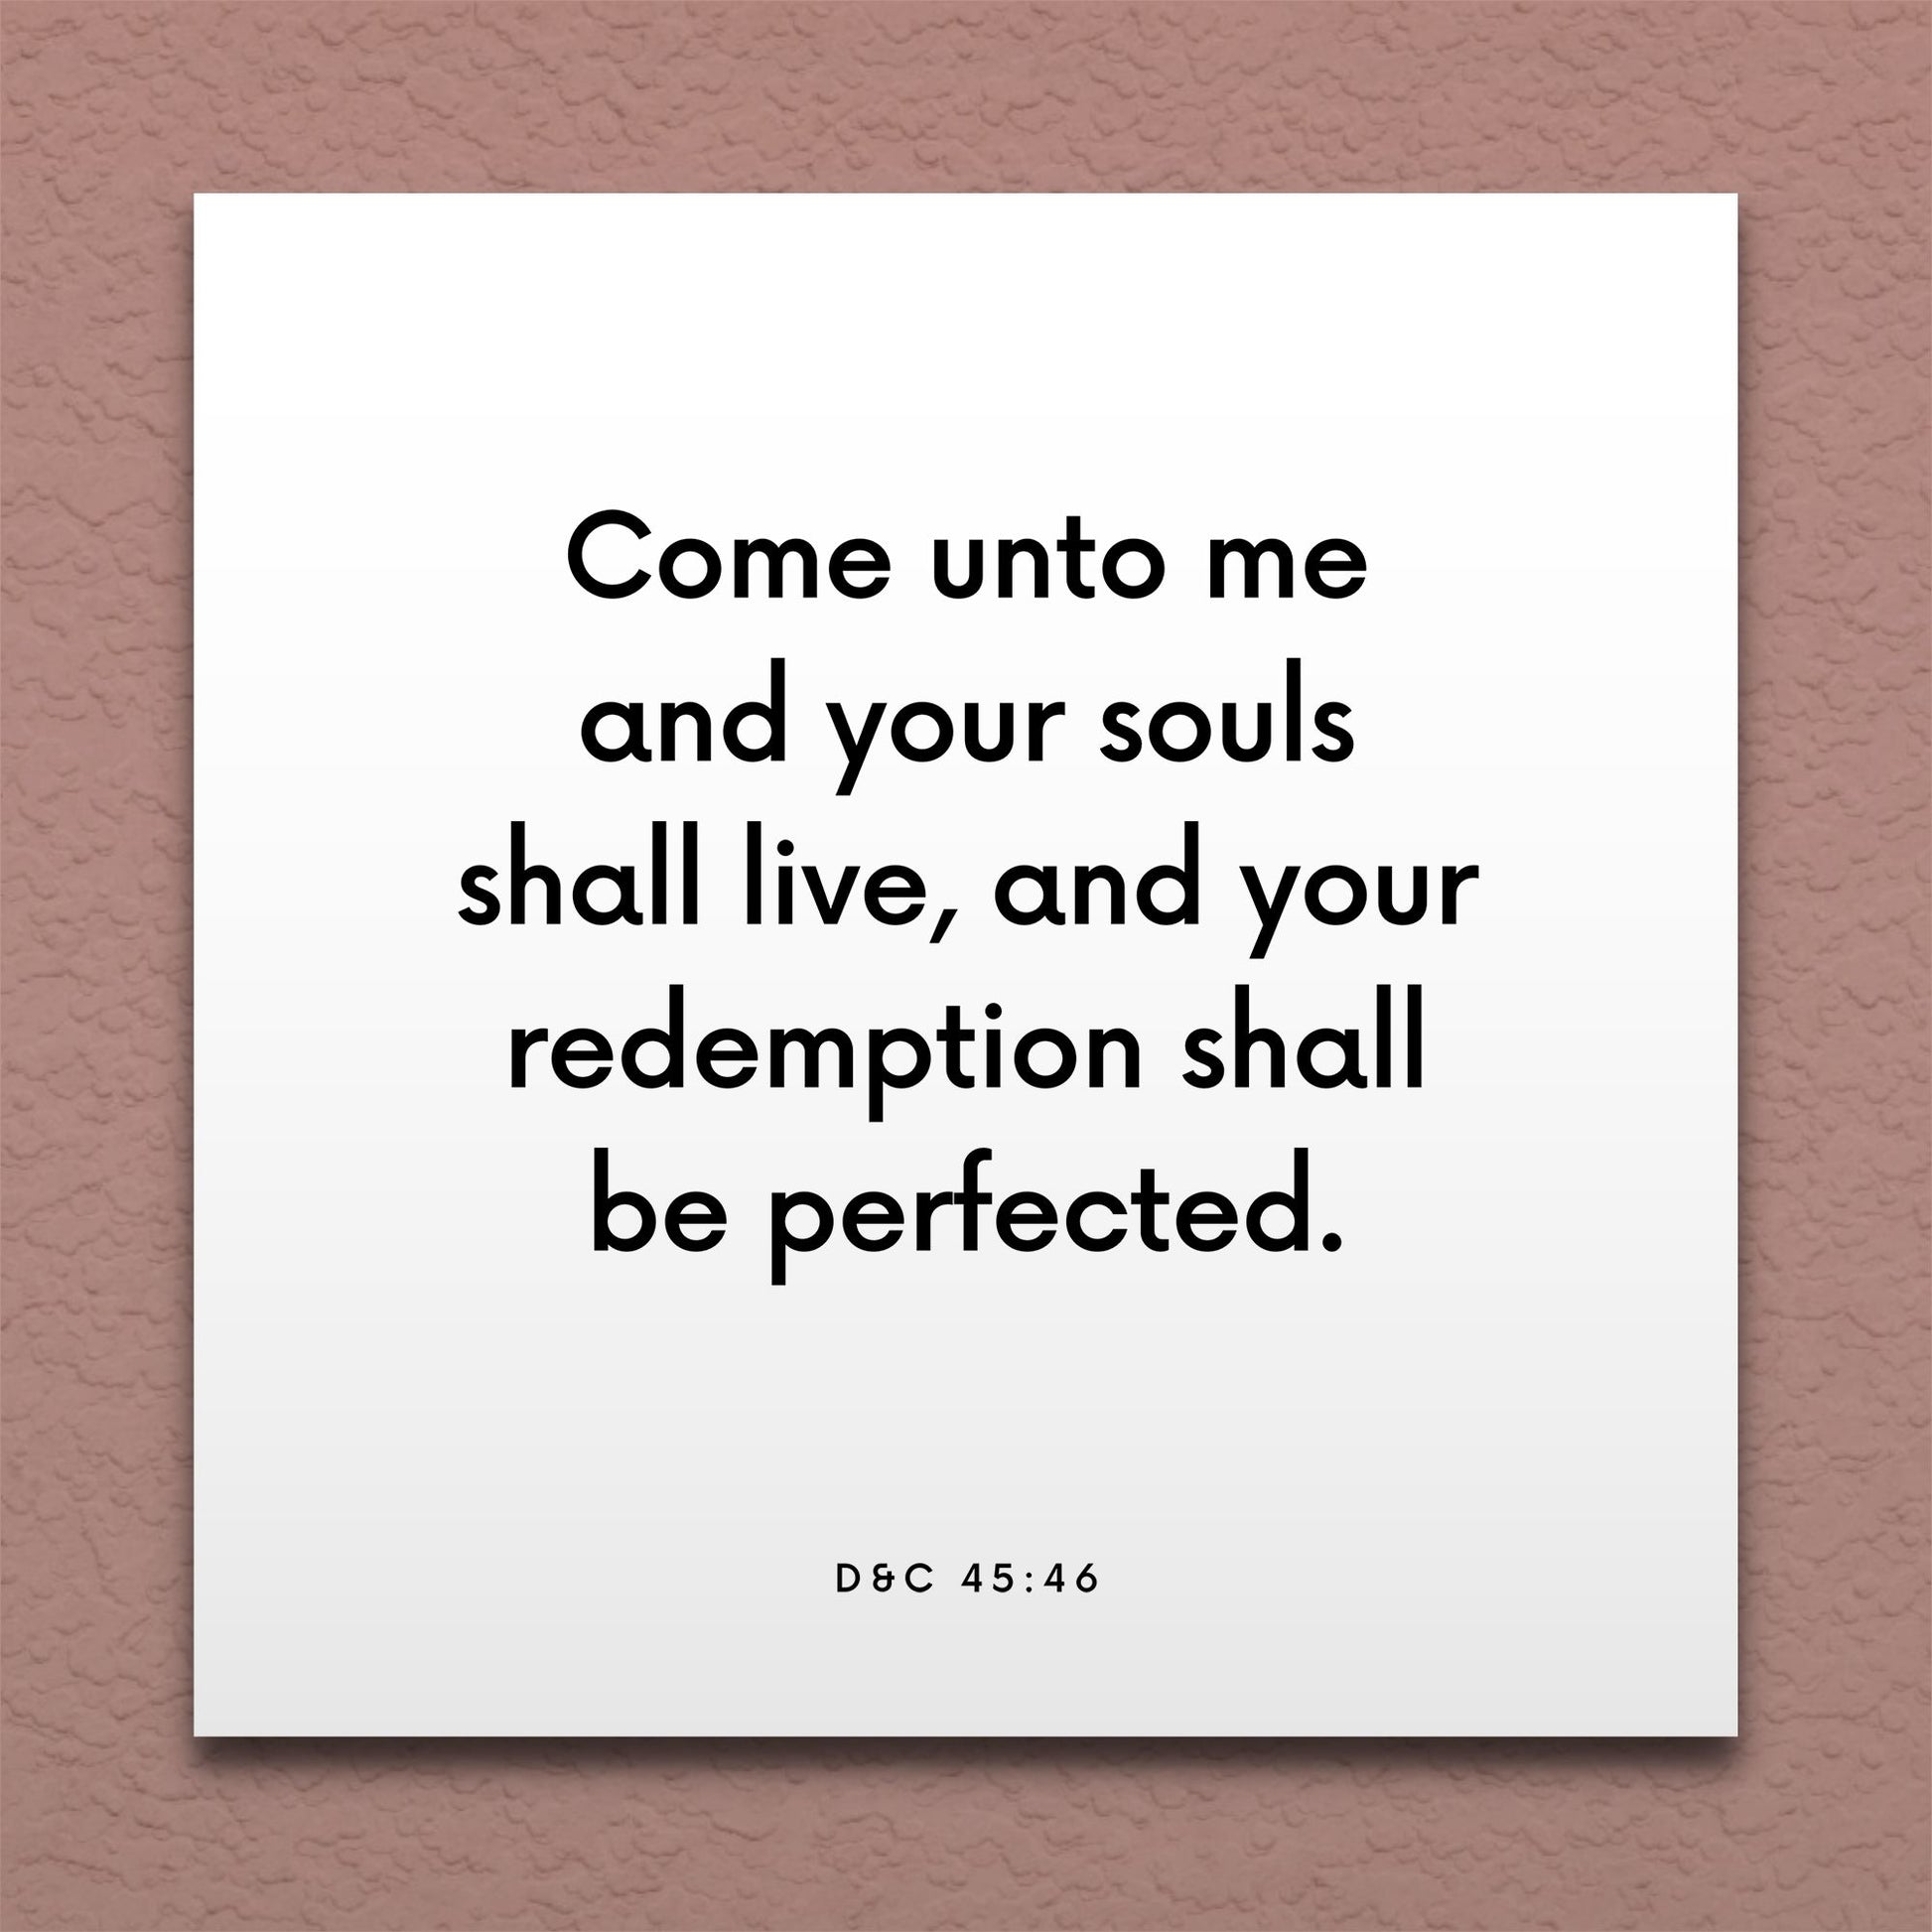 Wall-mounted scripture tile for D&C 45:46 - "Come unto me and your souls shall live"